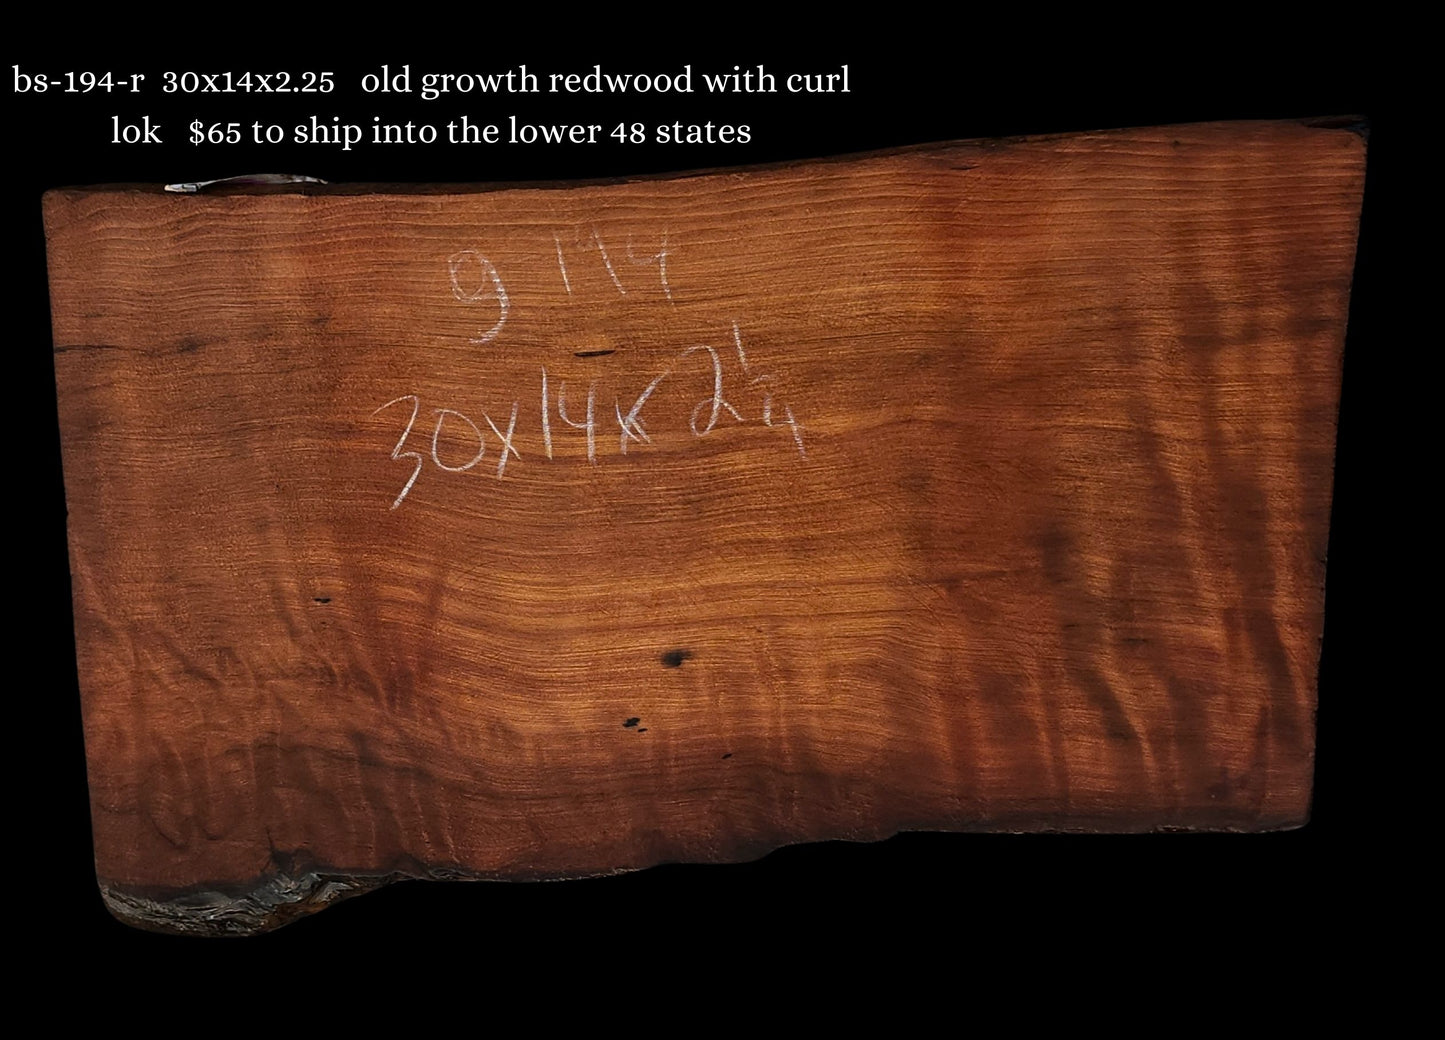 Old Growth | Curly Redwood | Guitar Wood | Craft Wood | bs-194-r